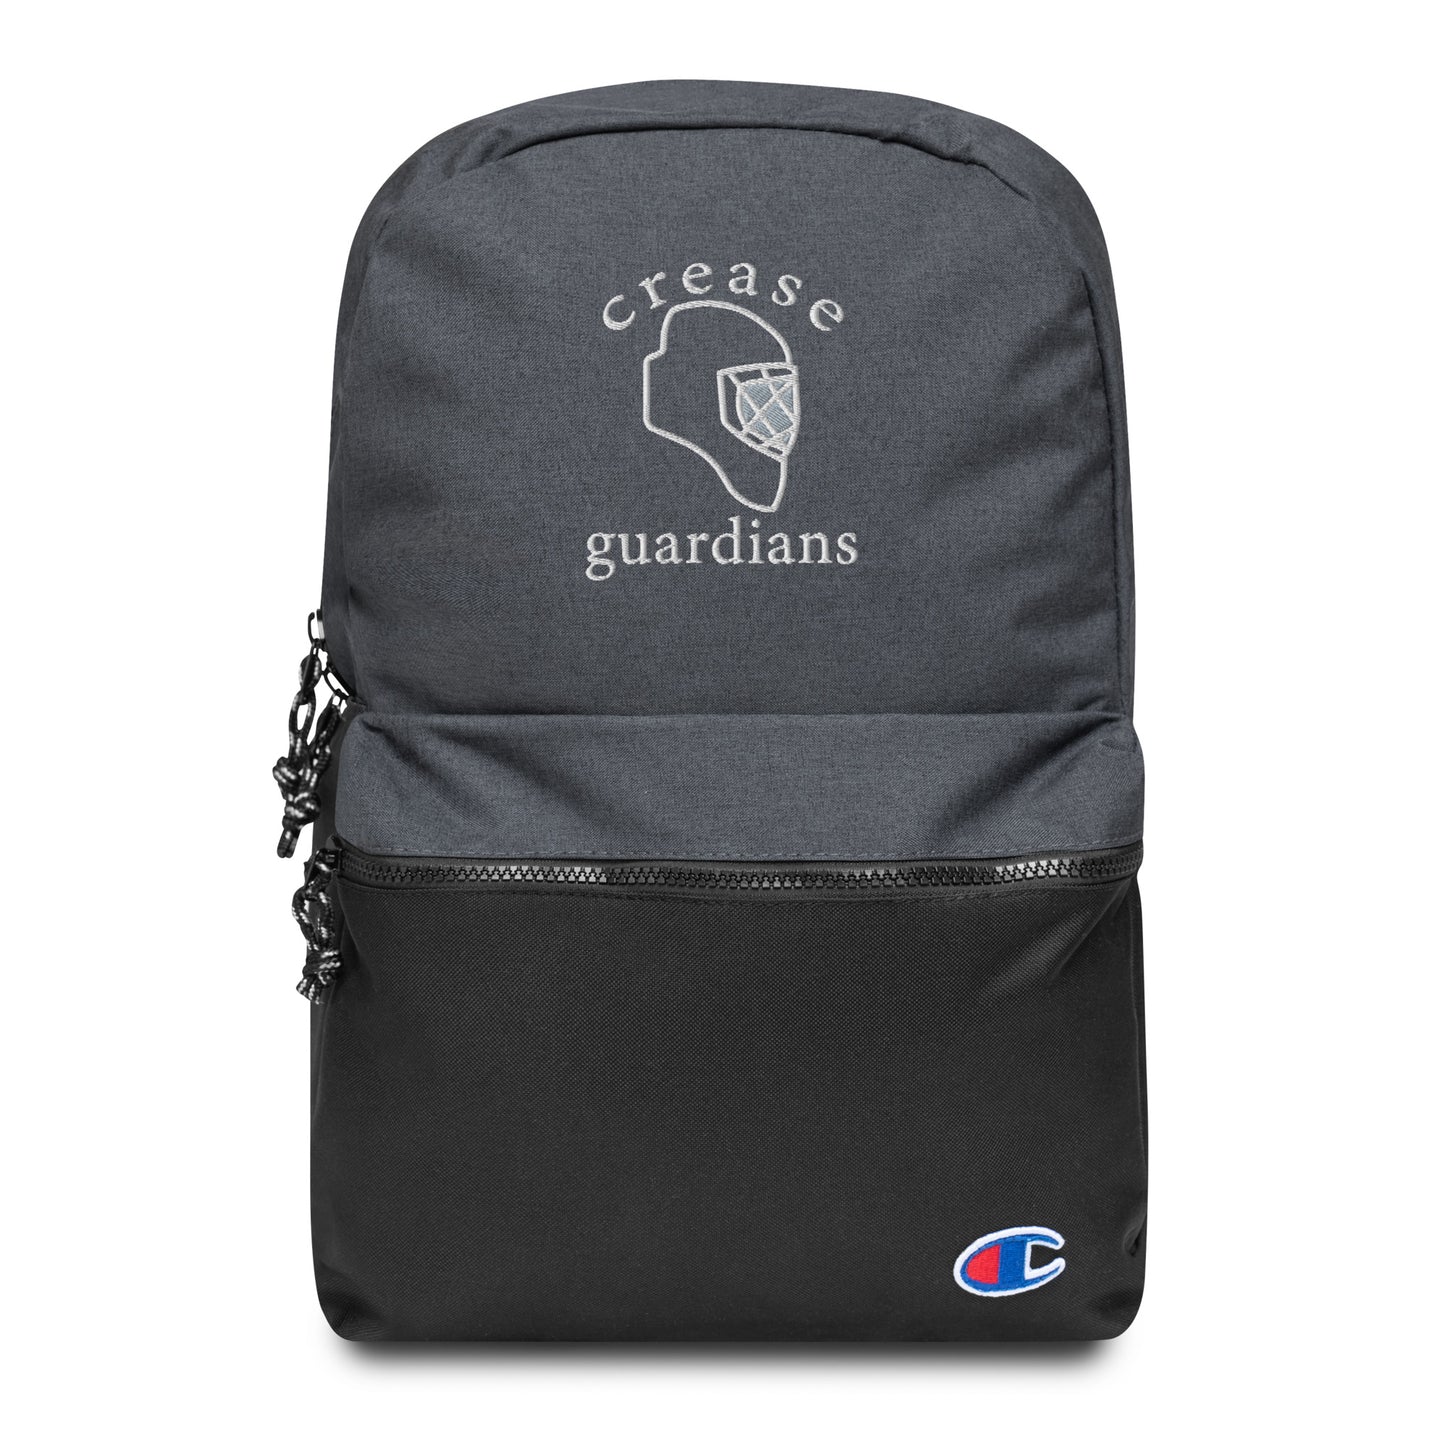 We Are Champion Embroidered Champion Backpack